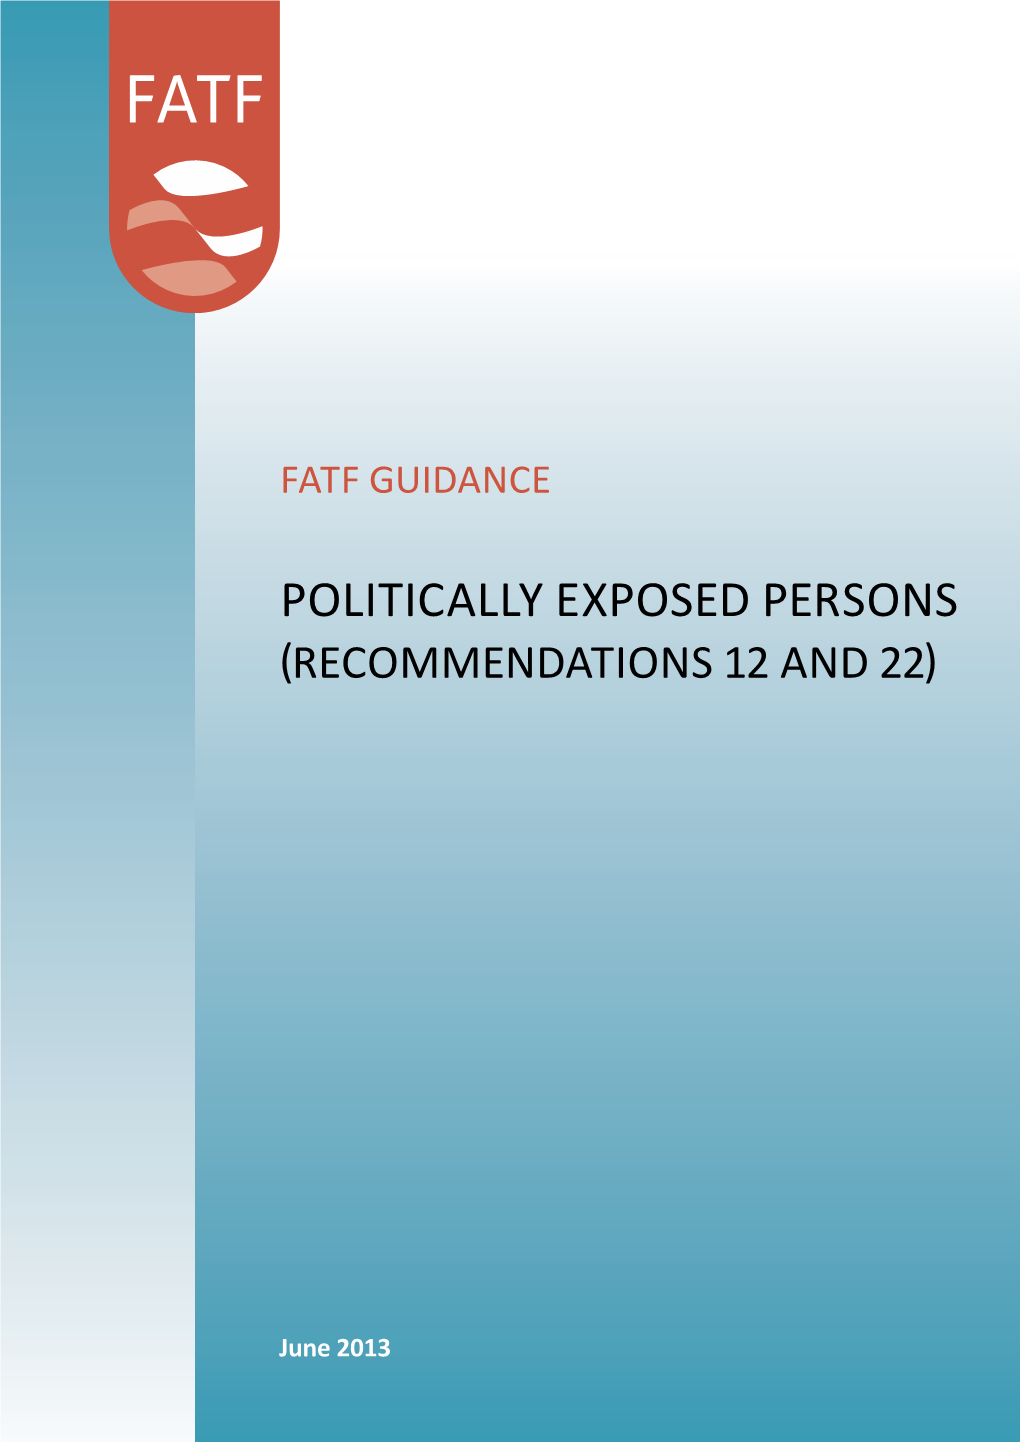 FATF Guidance Politically Exposed Persons (Recommendations 12 and 22)